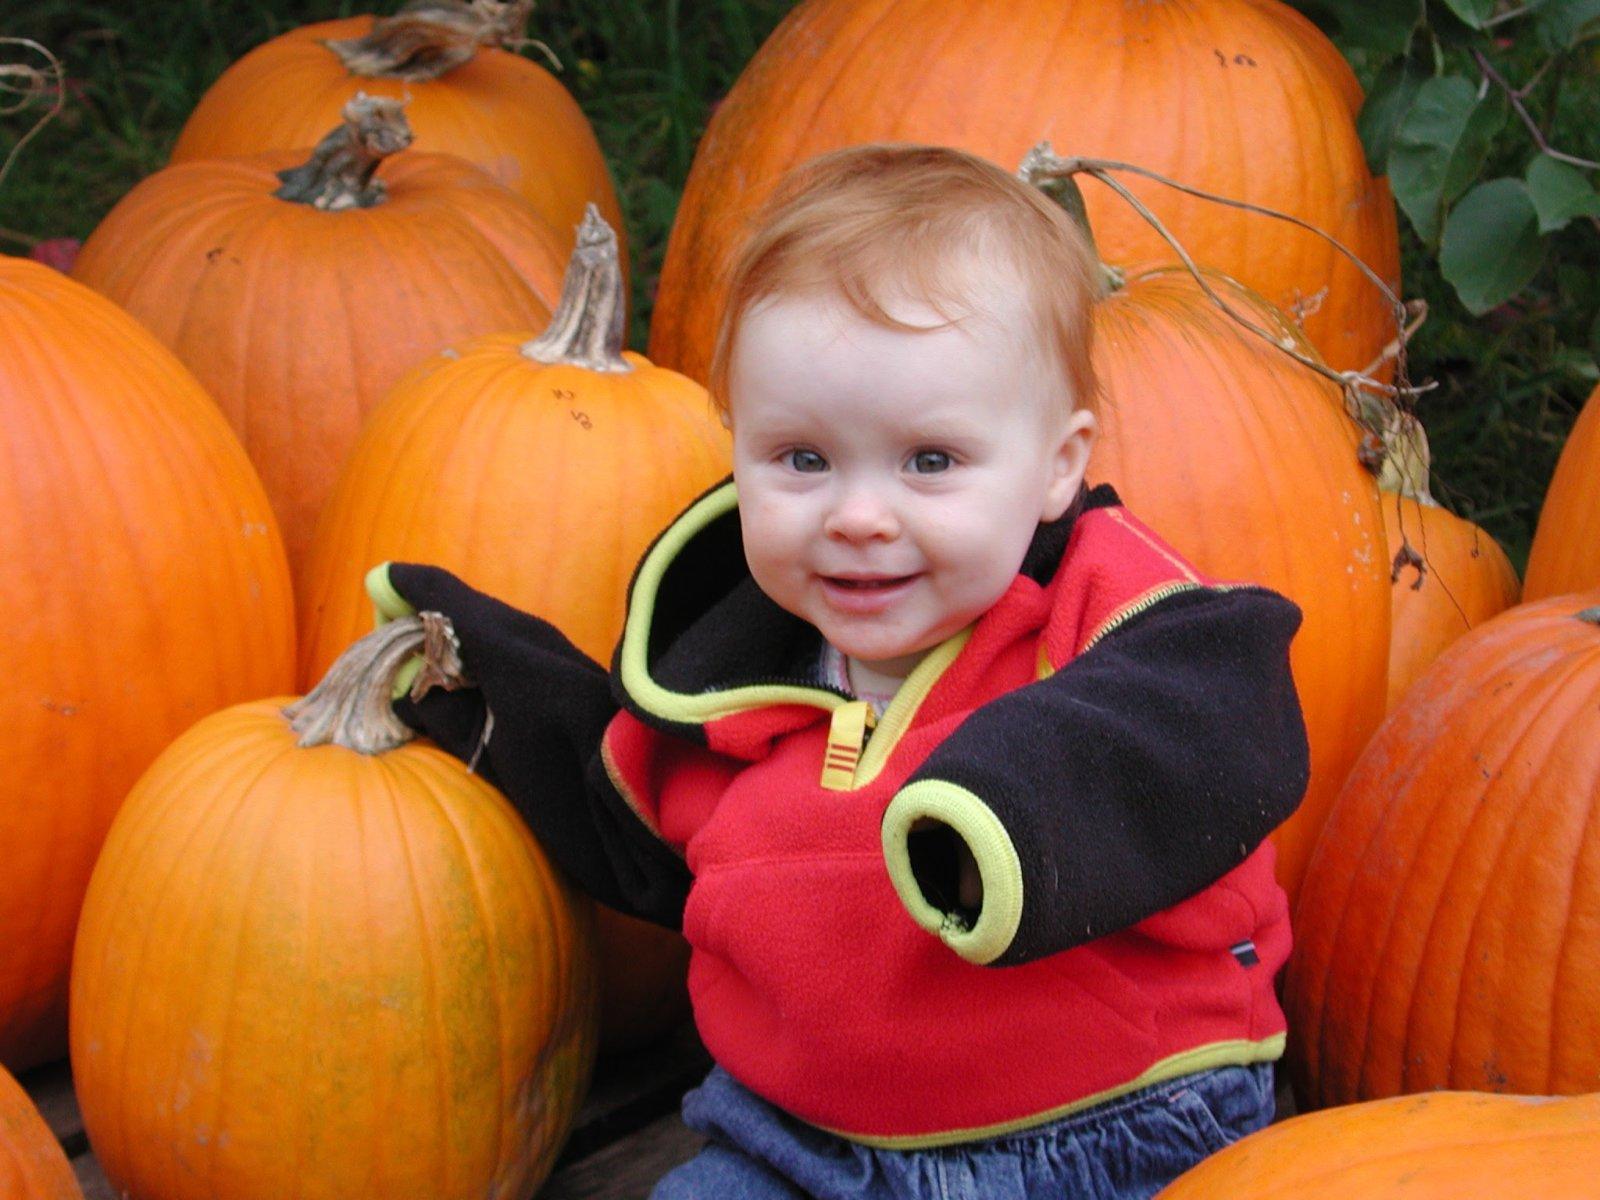 The first pumpkin patch with the solo child.